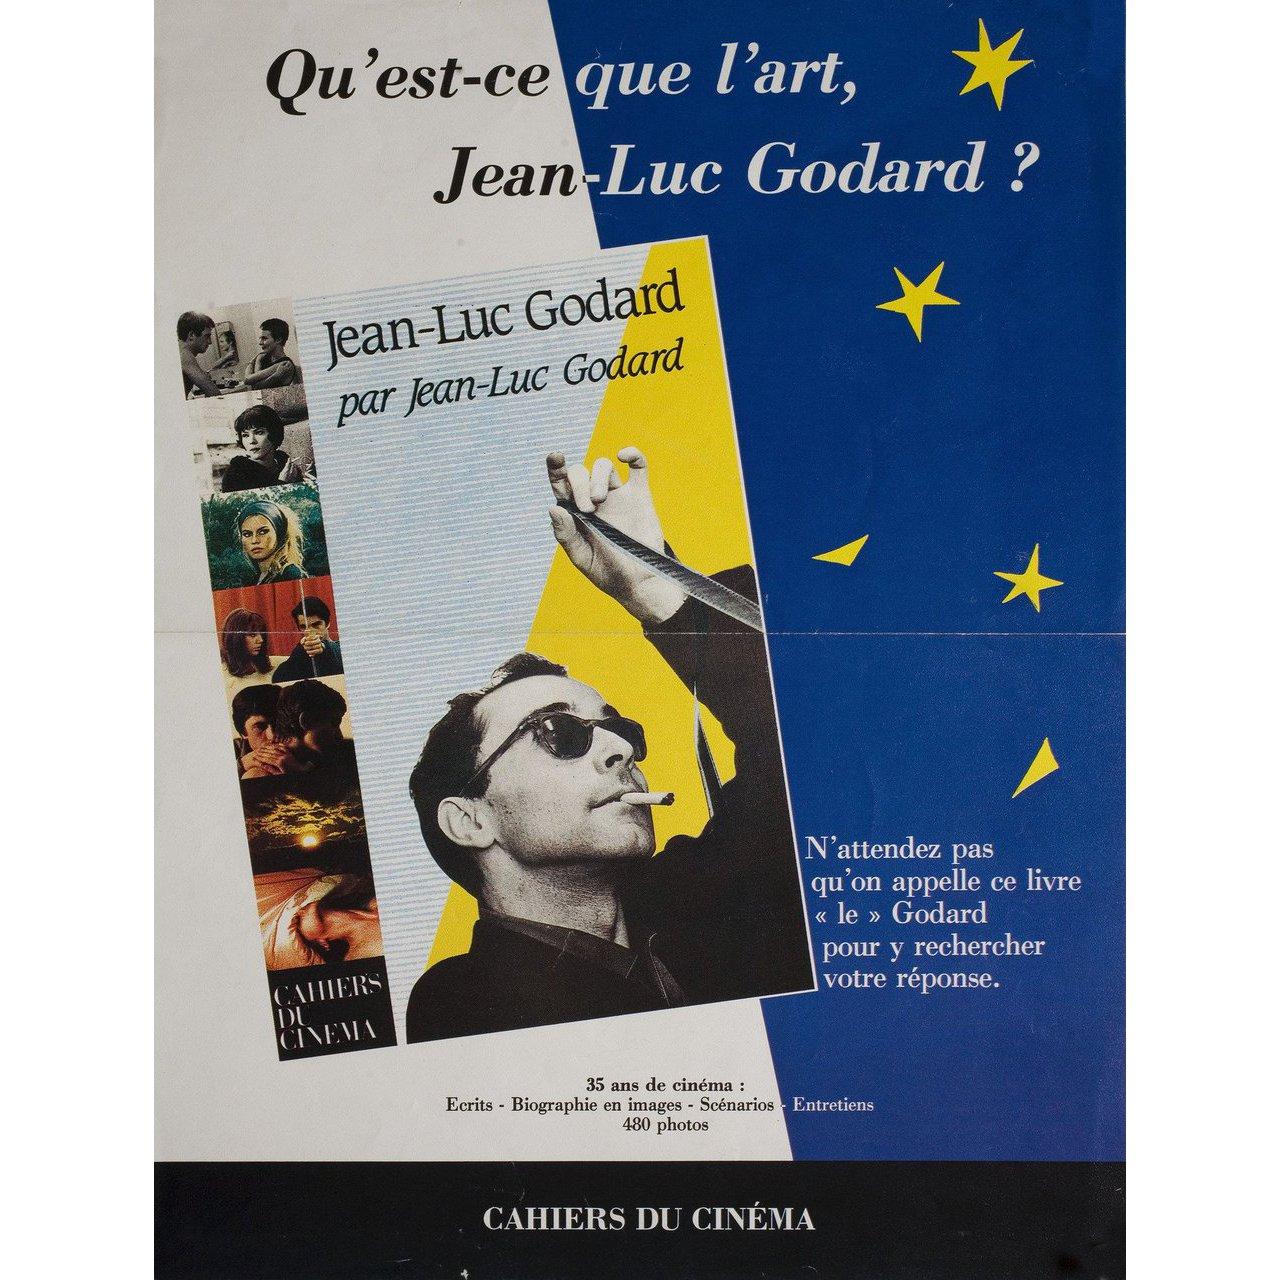 Original 1980s French A3 poster for “Jean-Luc Godard Par Jean-Luc Godard” (1980s). Fine condition, folded. Many original posters were issued folded or were subsequently folded. Please note: the size is stated in inches and the actual size can vary